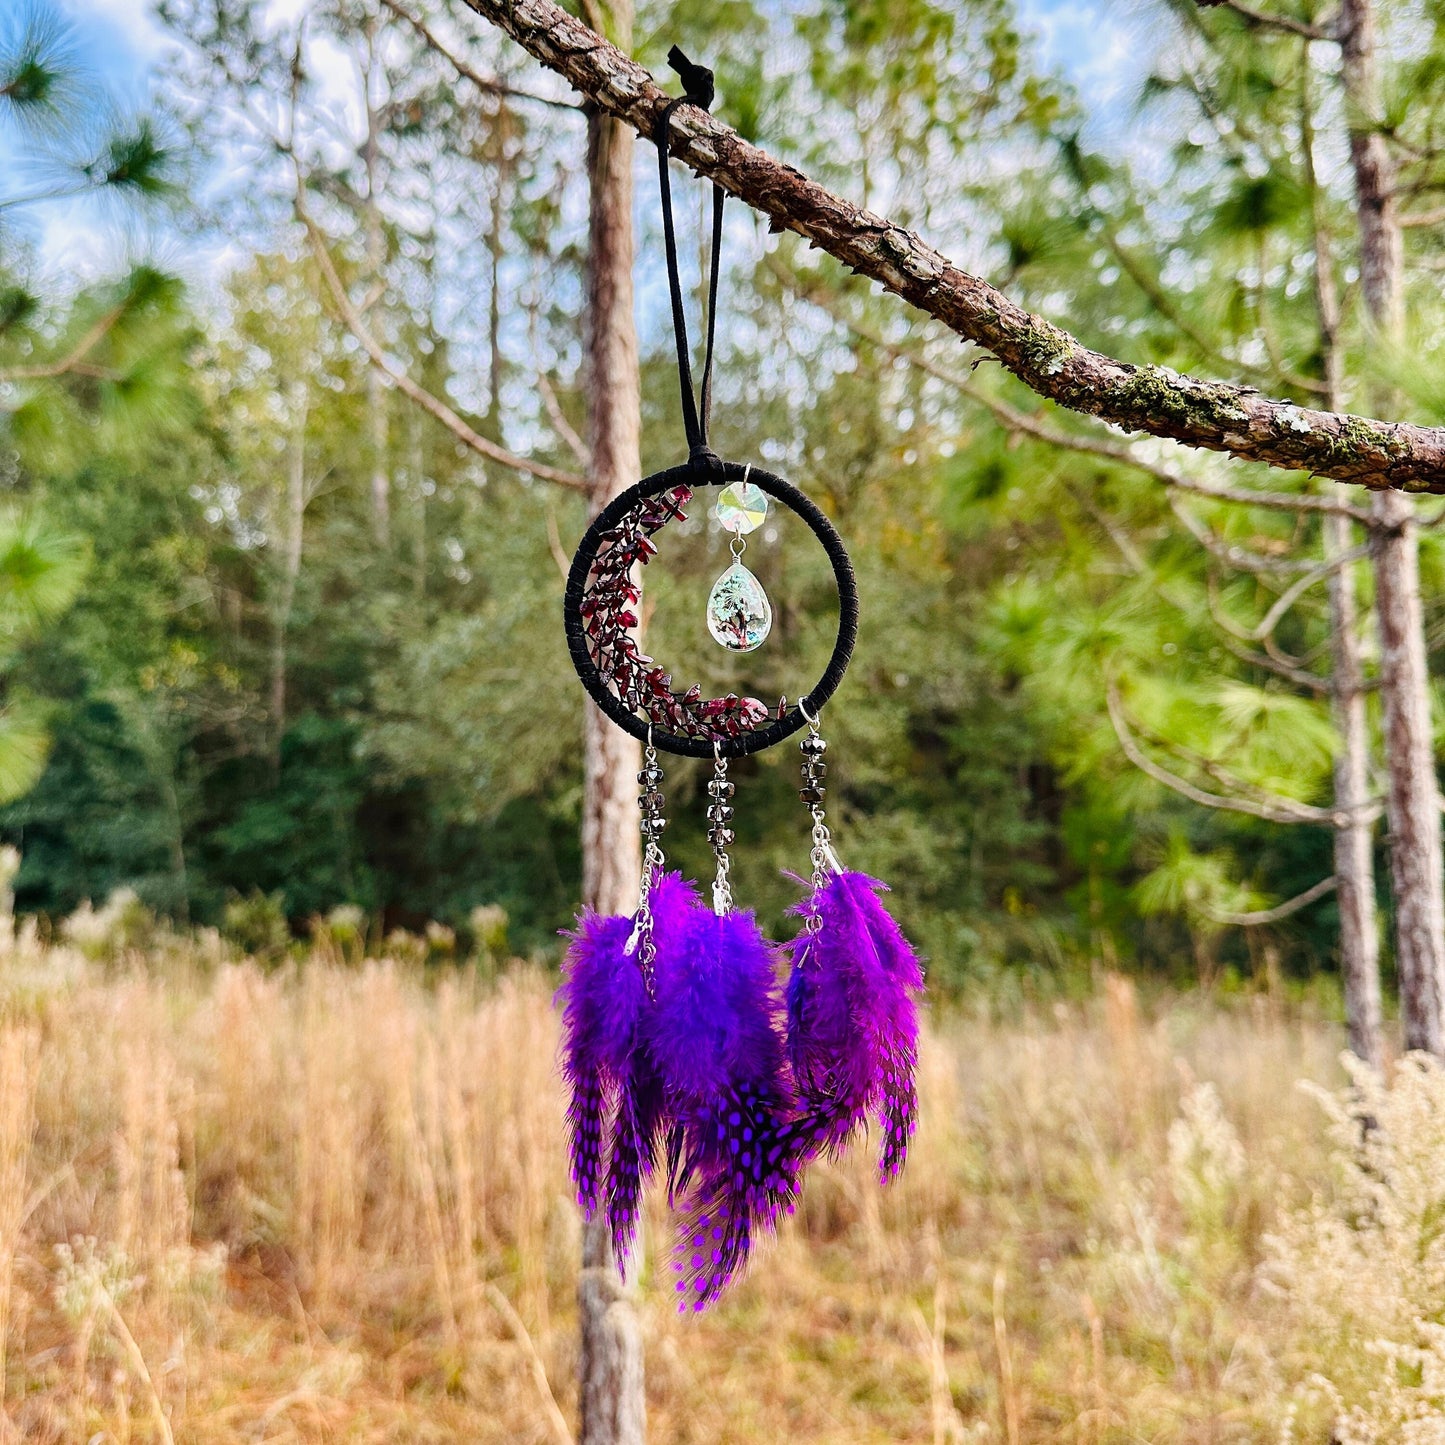 Dark Purple Crescent Moon Dreamcatcher with Purple Spotted Feathers & Decorative Tree Hanging Charm, Rearview Mirror Hanging or Wall Hanging